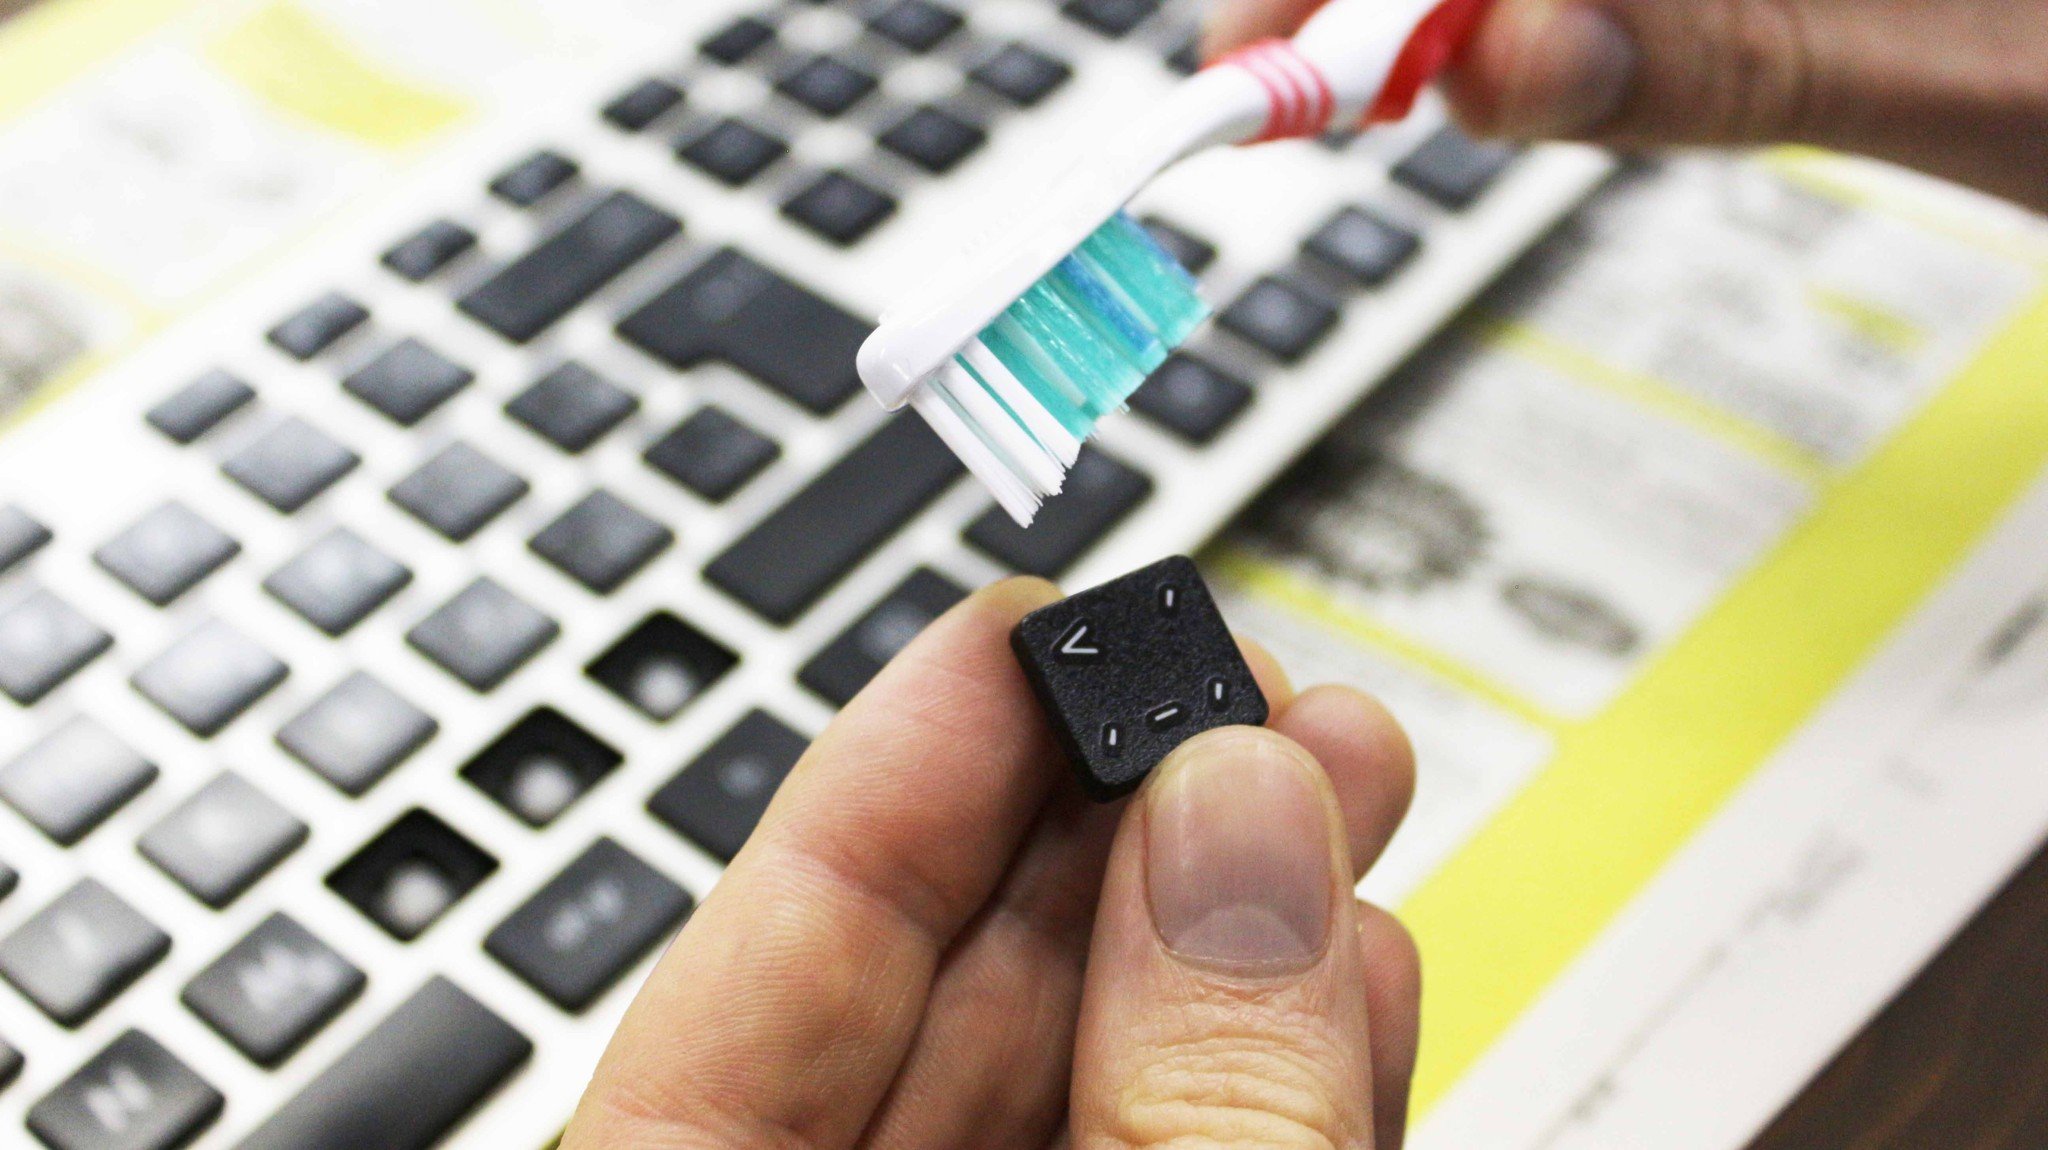 Scrub each keycap using a toothbrush and isopropyl alcohol.